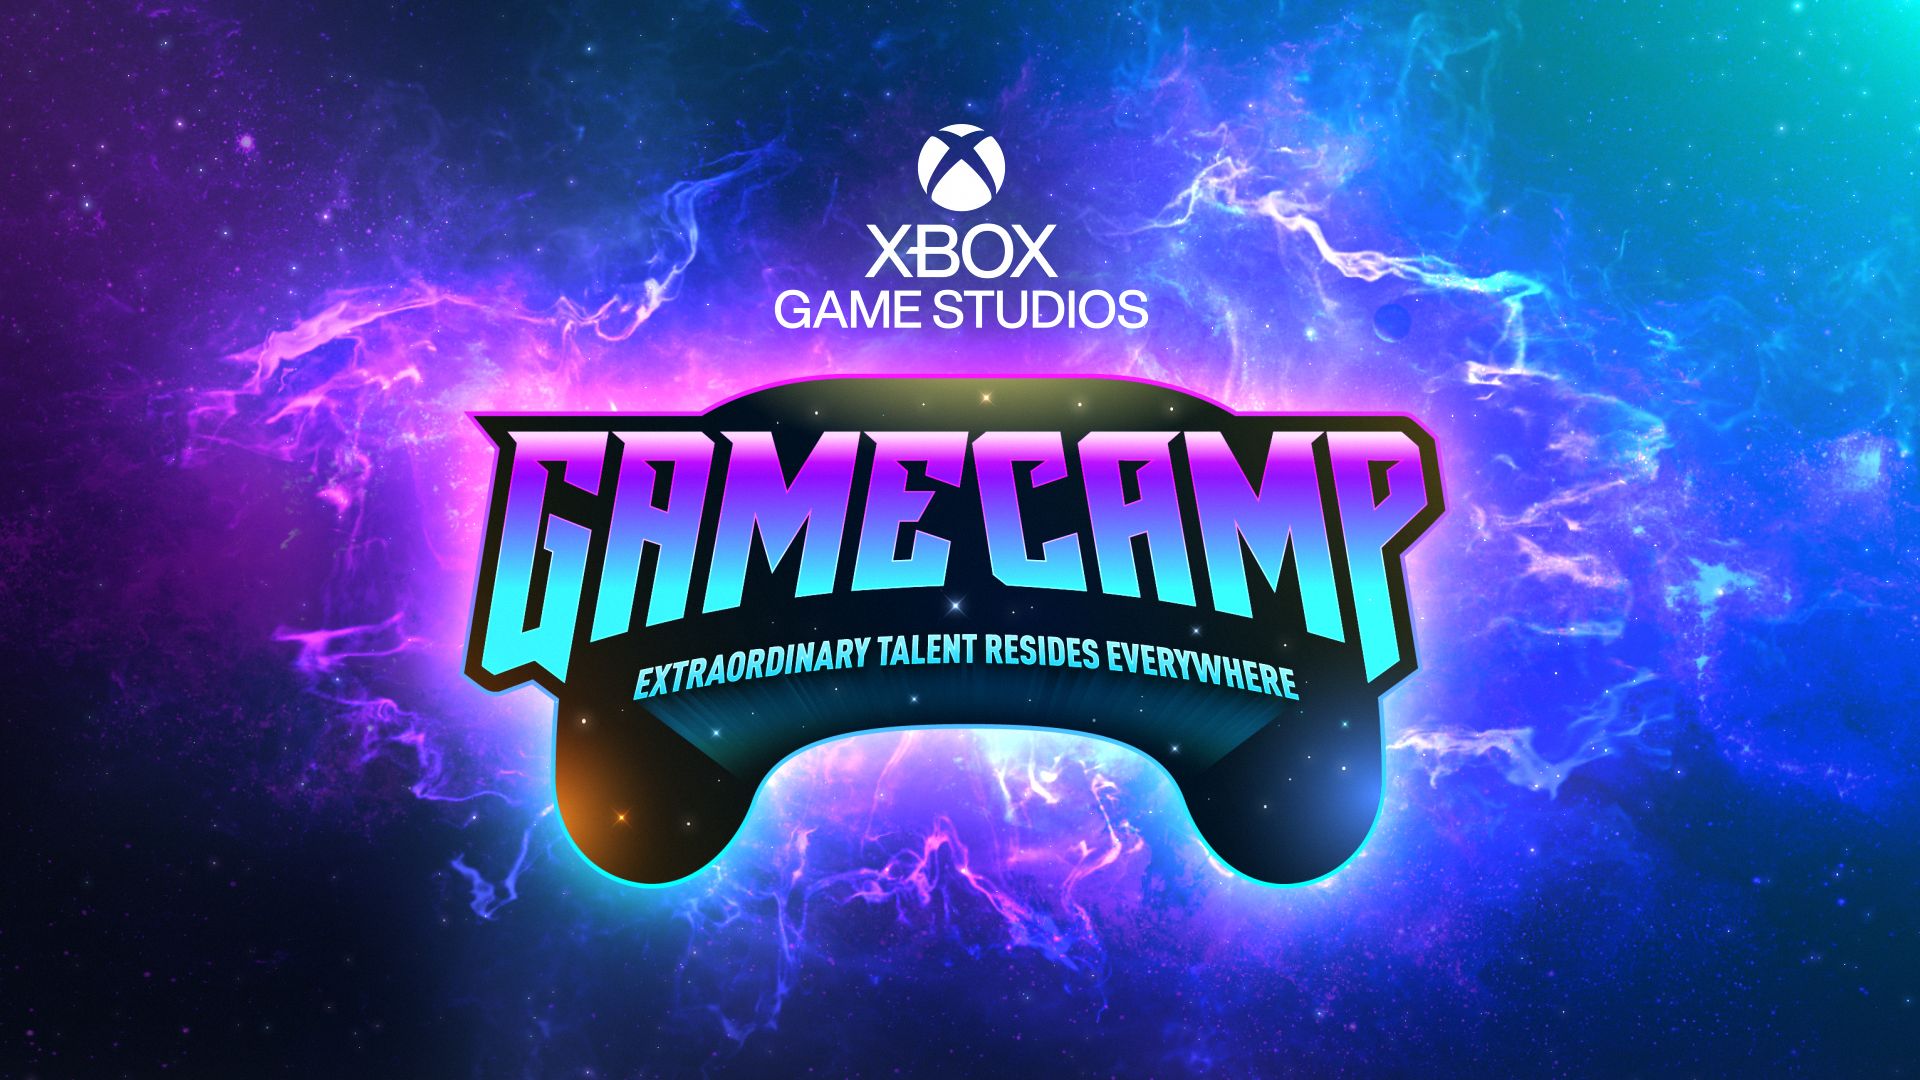 Game Developers Find Their "Superpower" with Xbox Game Studios Game Camp